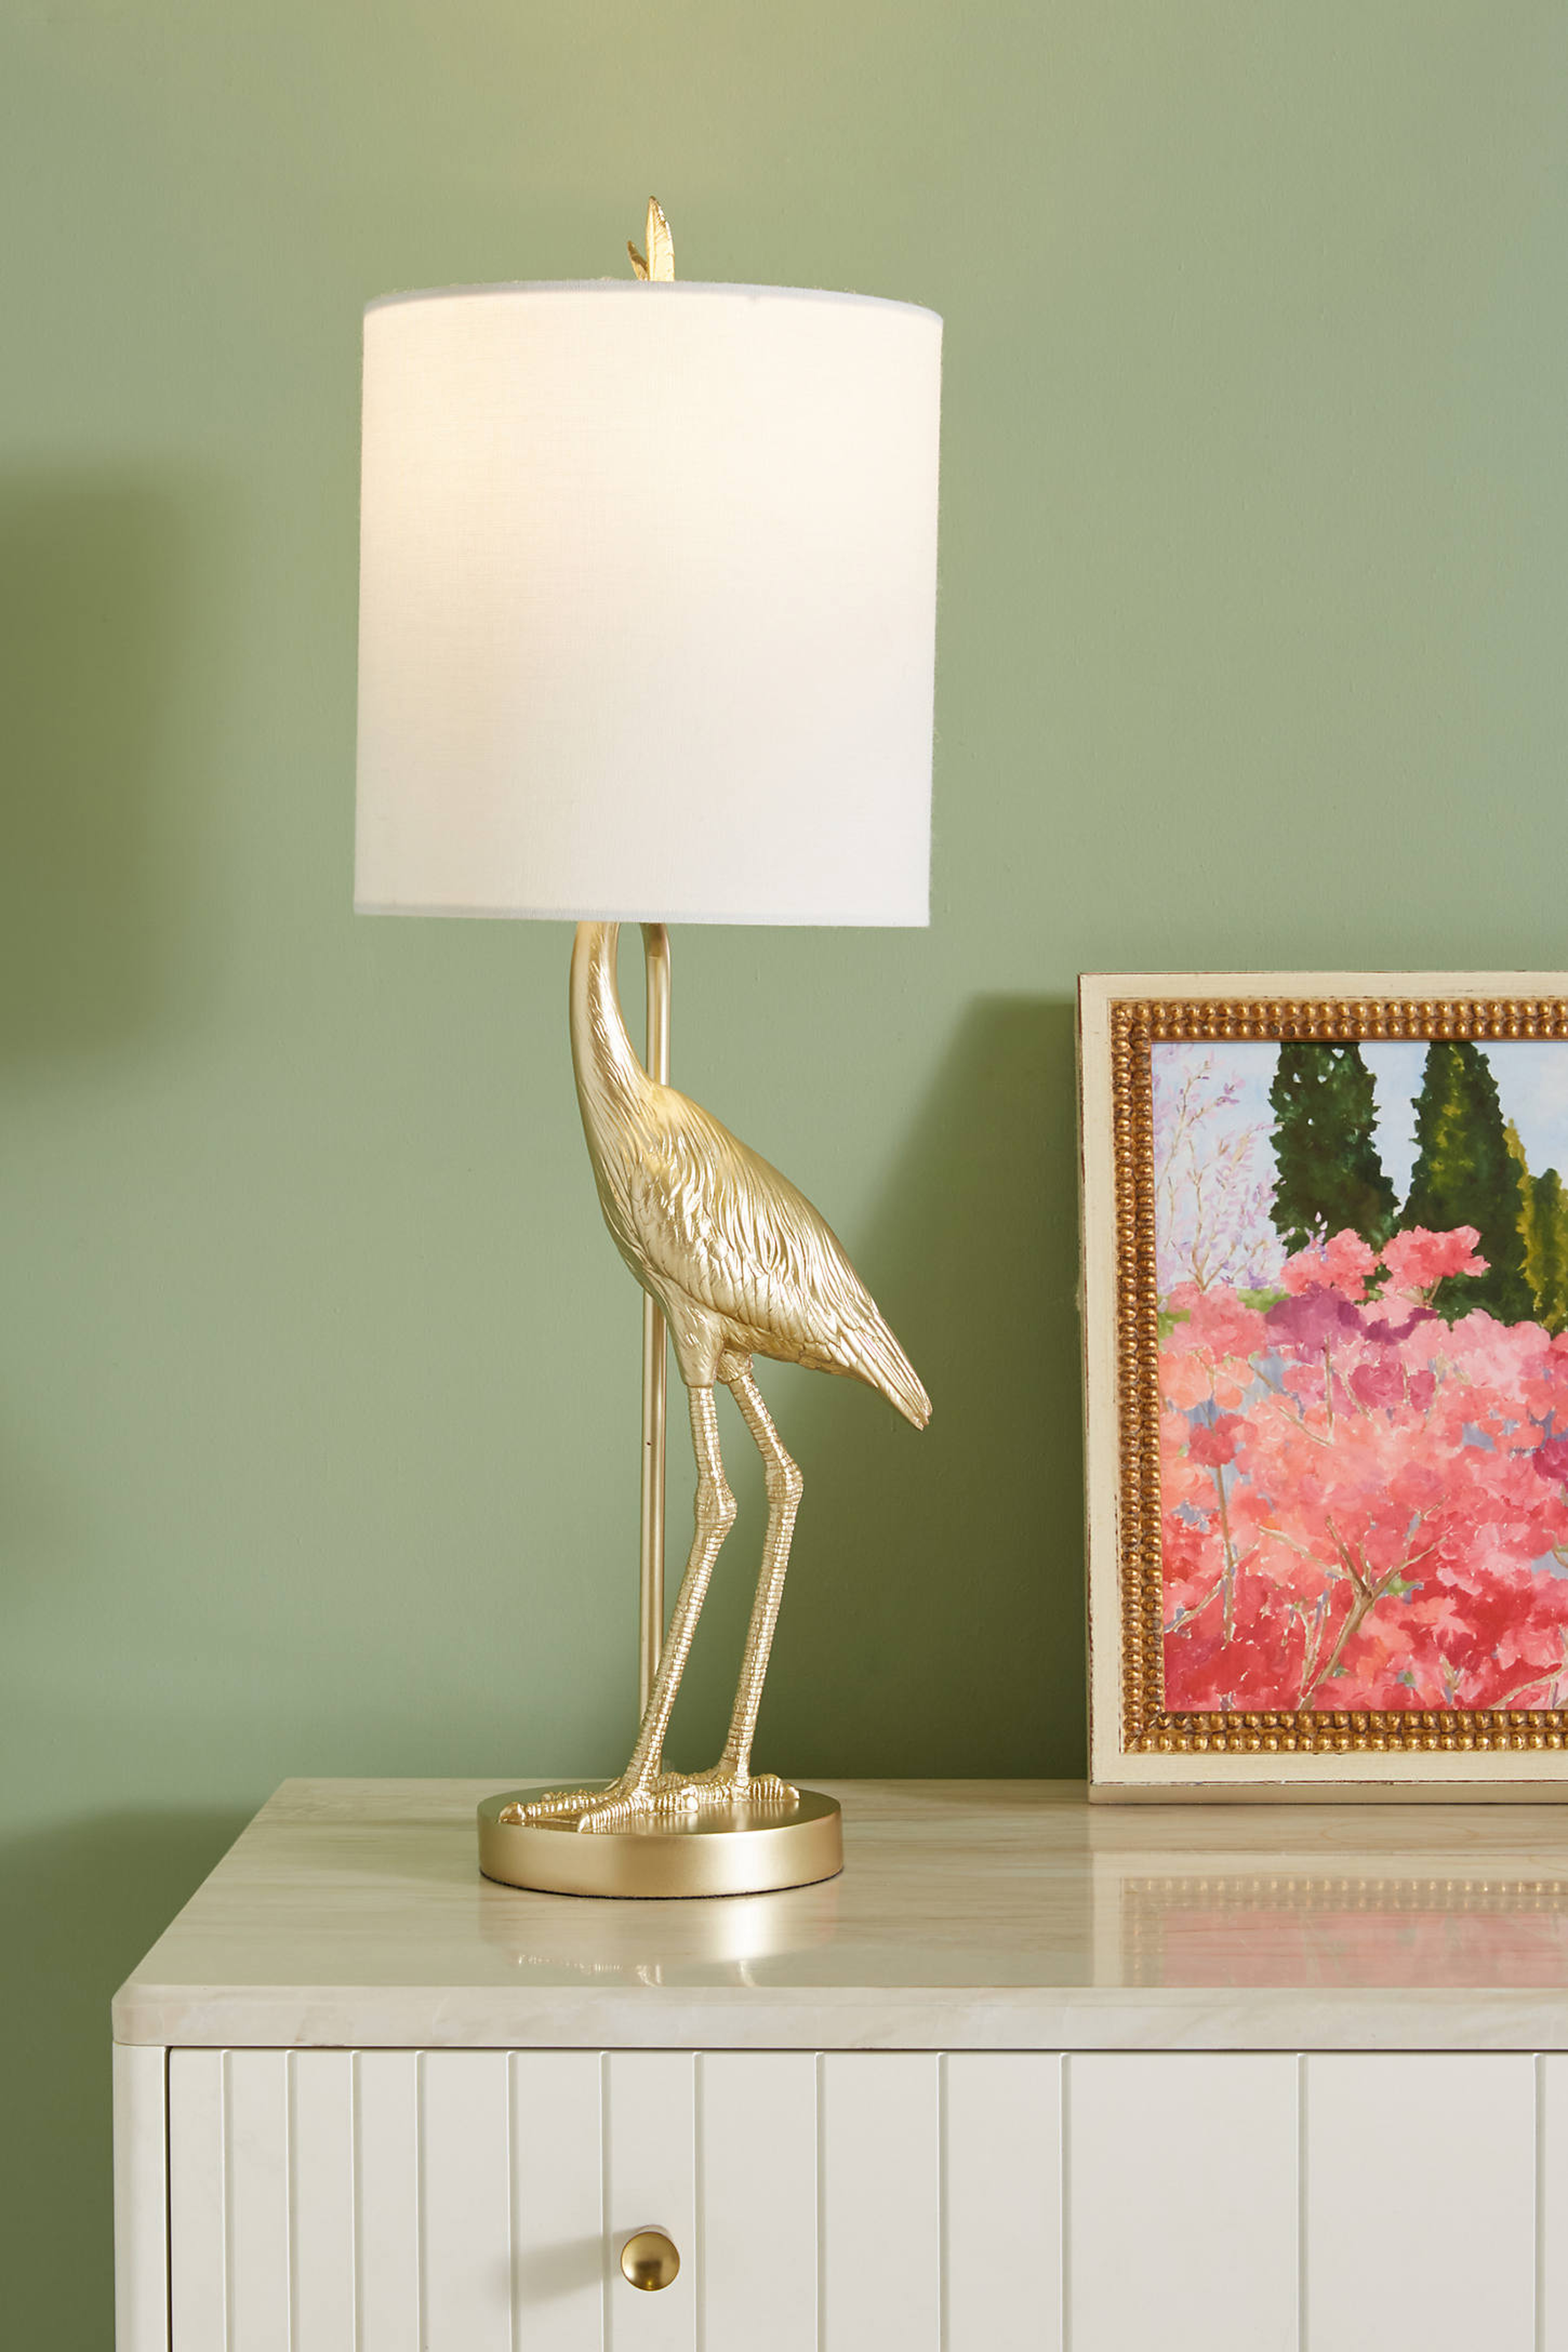 Flamingo Table Lamp By Anthropologie in White - Anthropologie